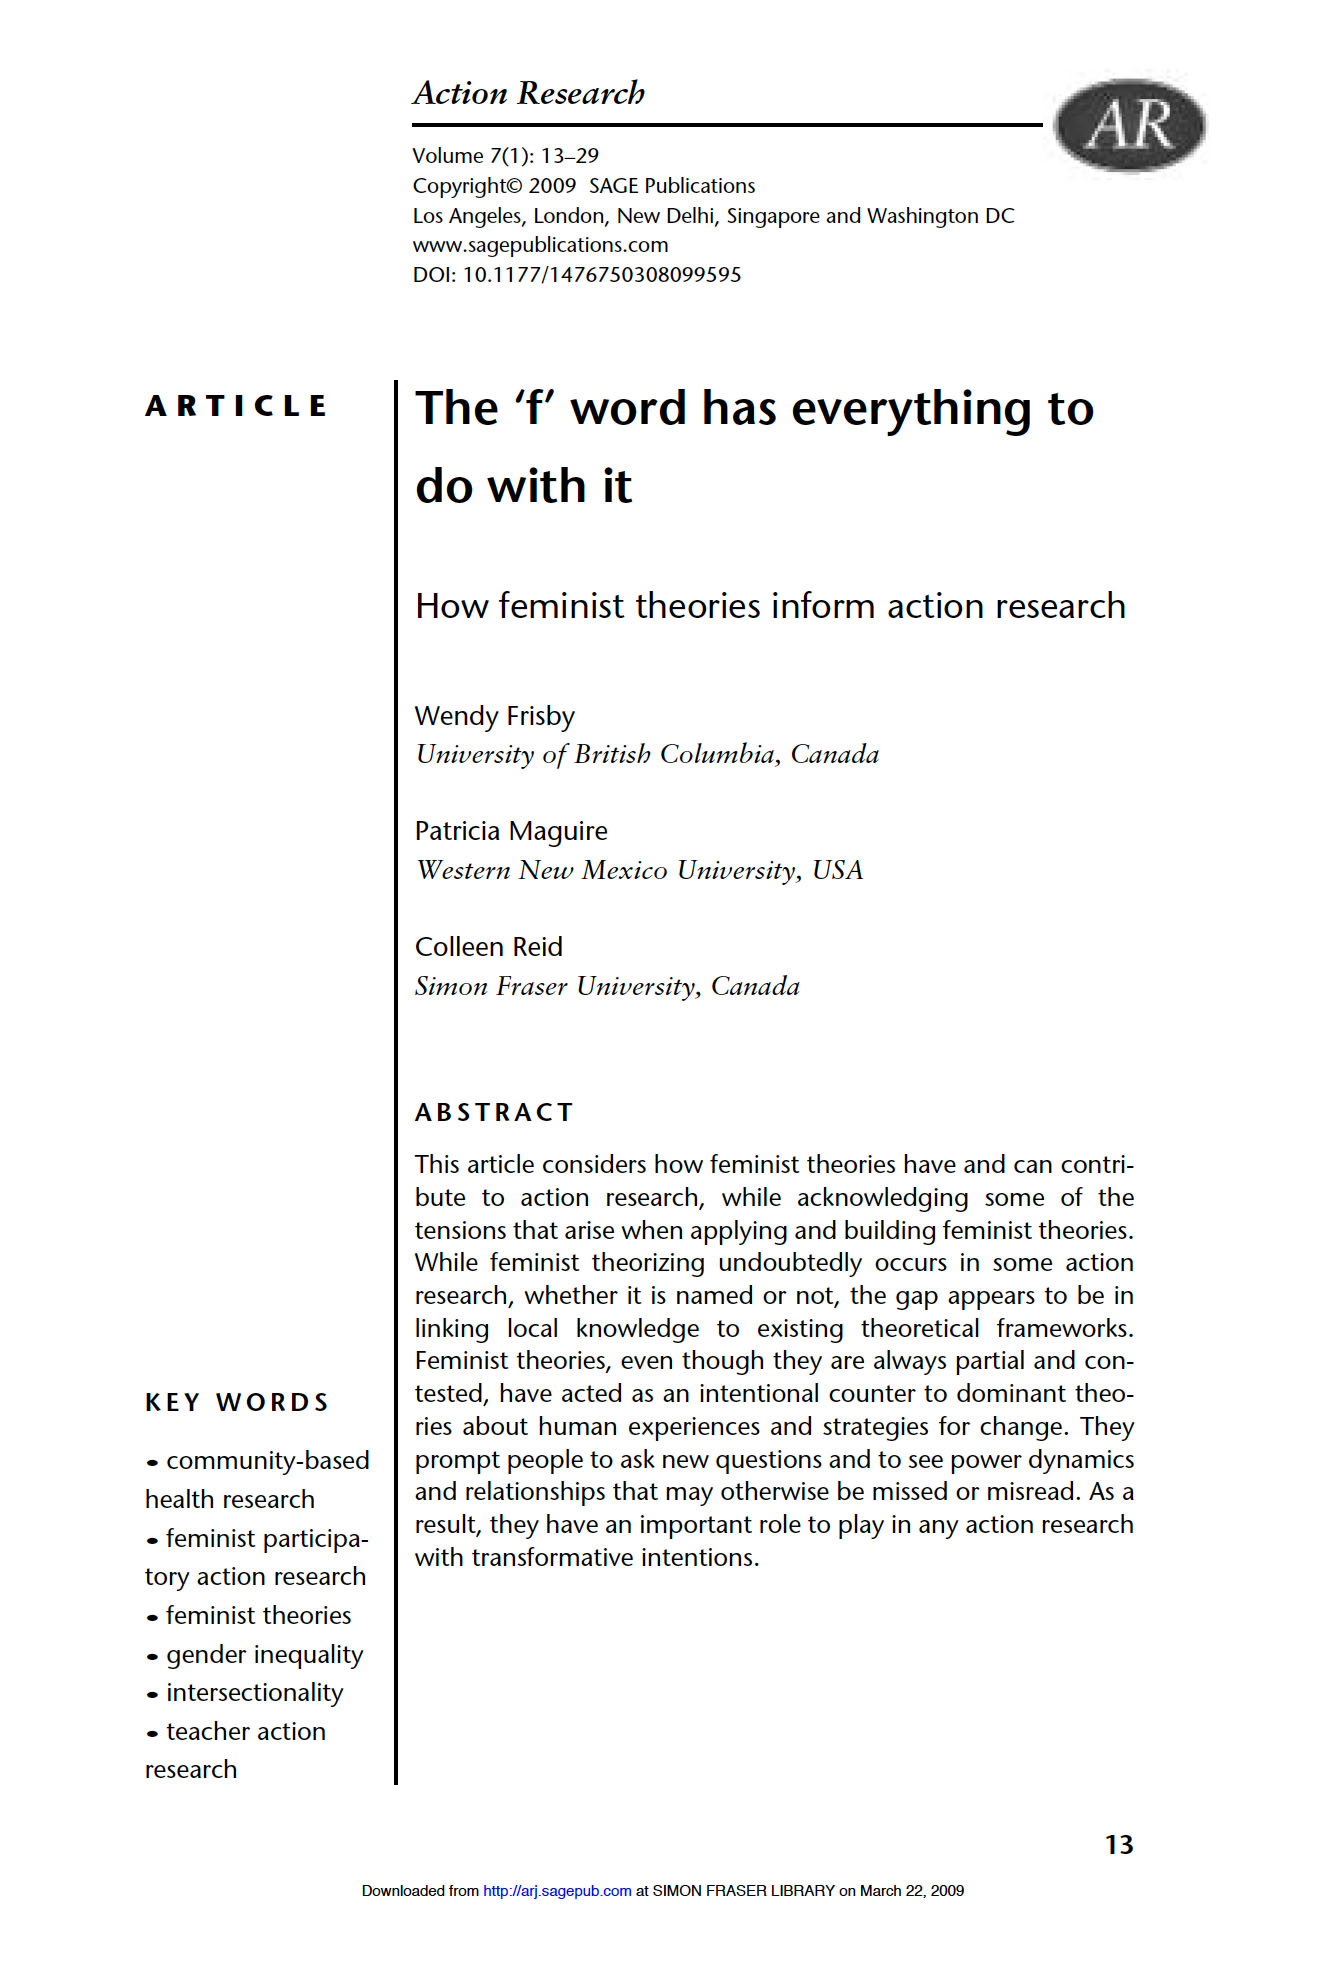 The f word - How feminist theories inform action research 2009